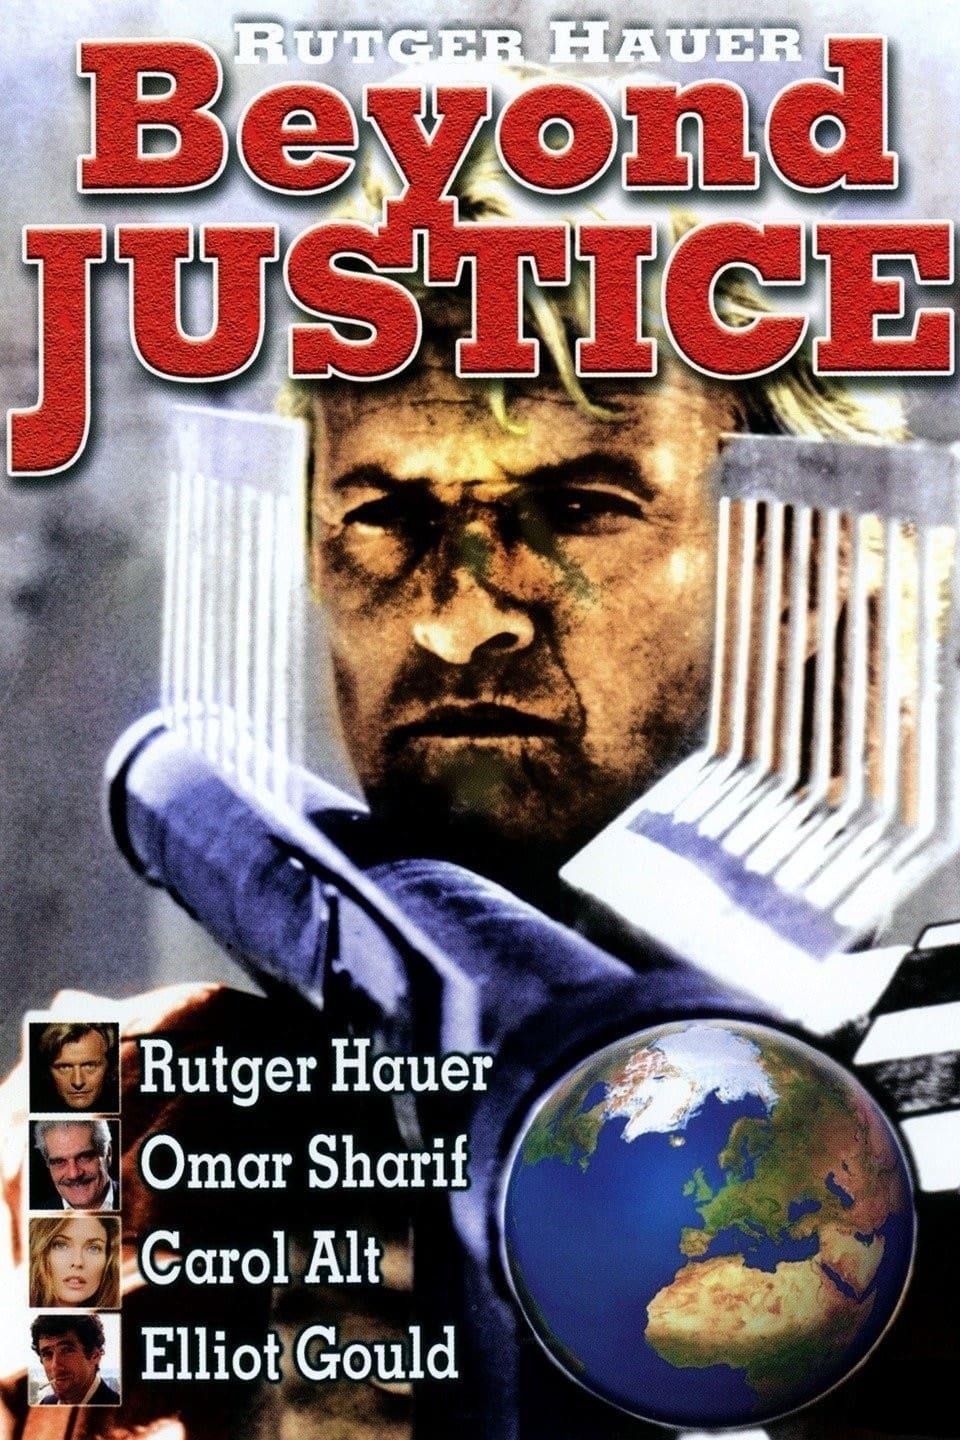 Beyond Justice poster